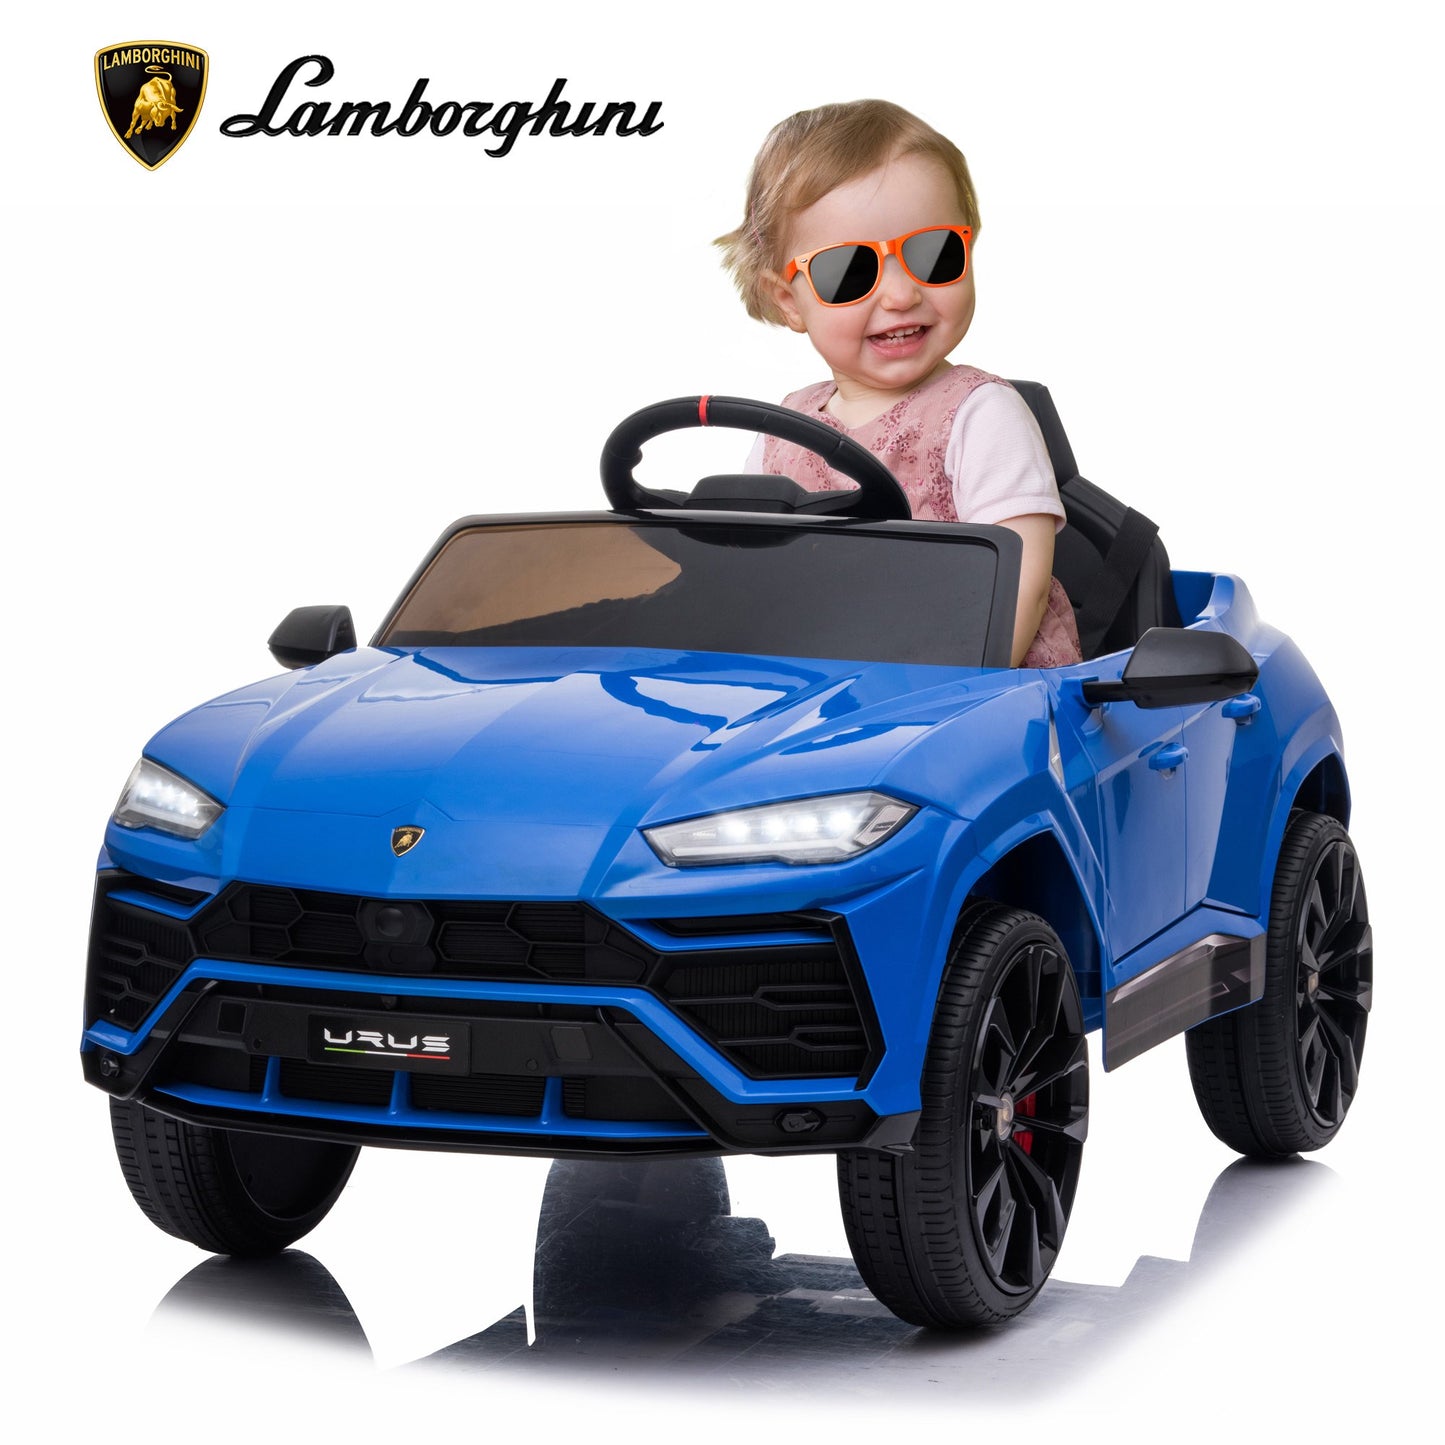 SYNGAR Blue Ride on Car Toys for Boys girls, Licensed Lamborghini Ride on Cars with LED Lights, and 3 Speeds, 12V Battery Operated Car Toy